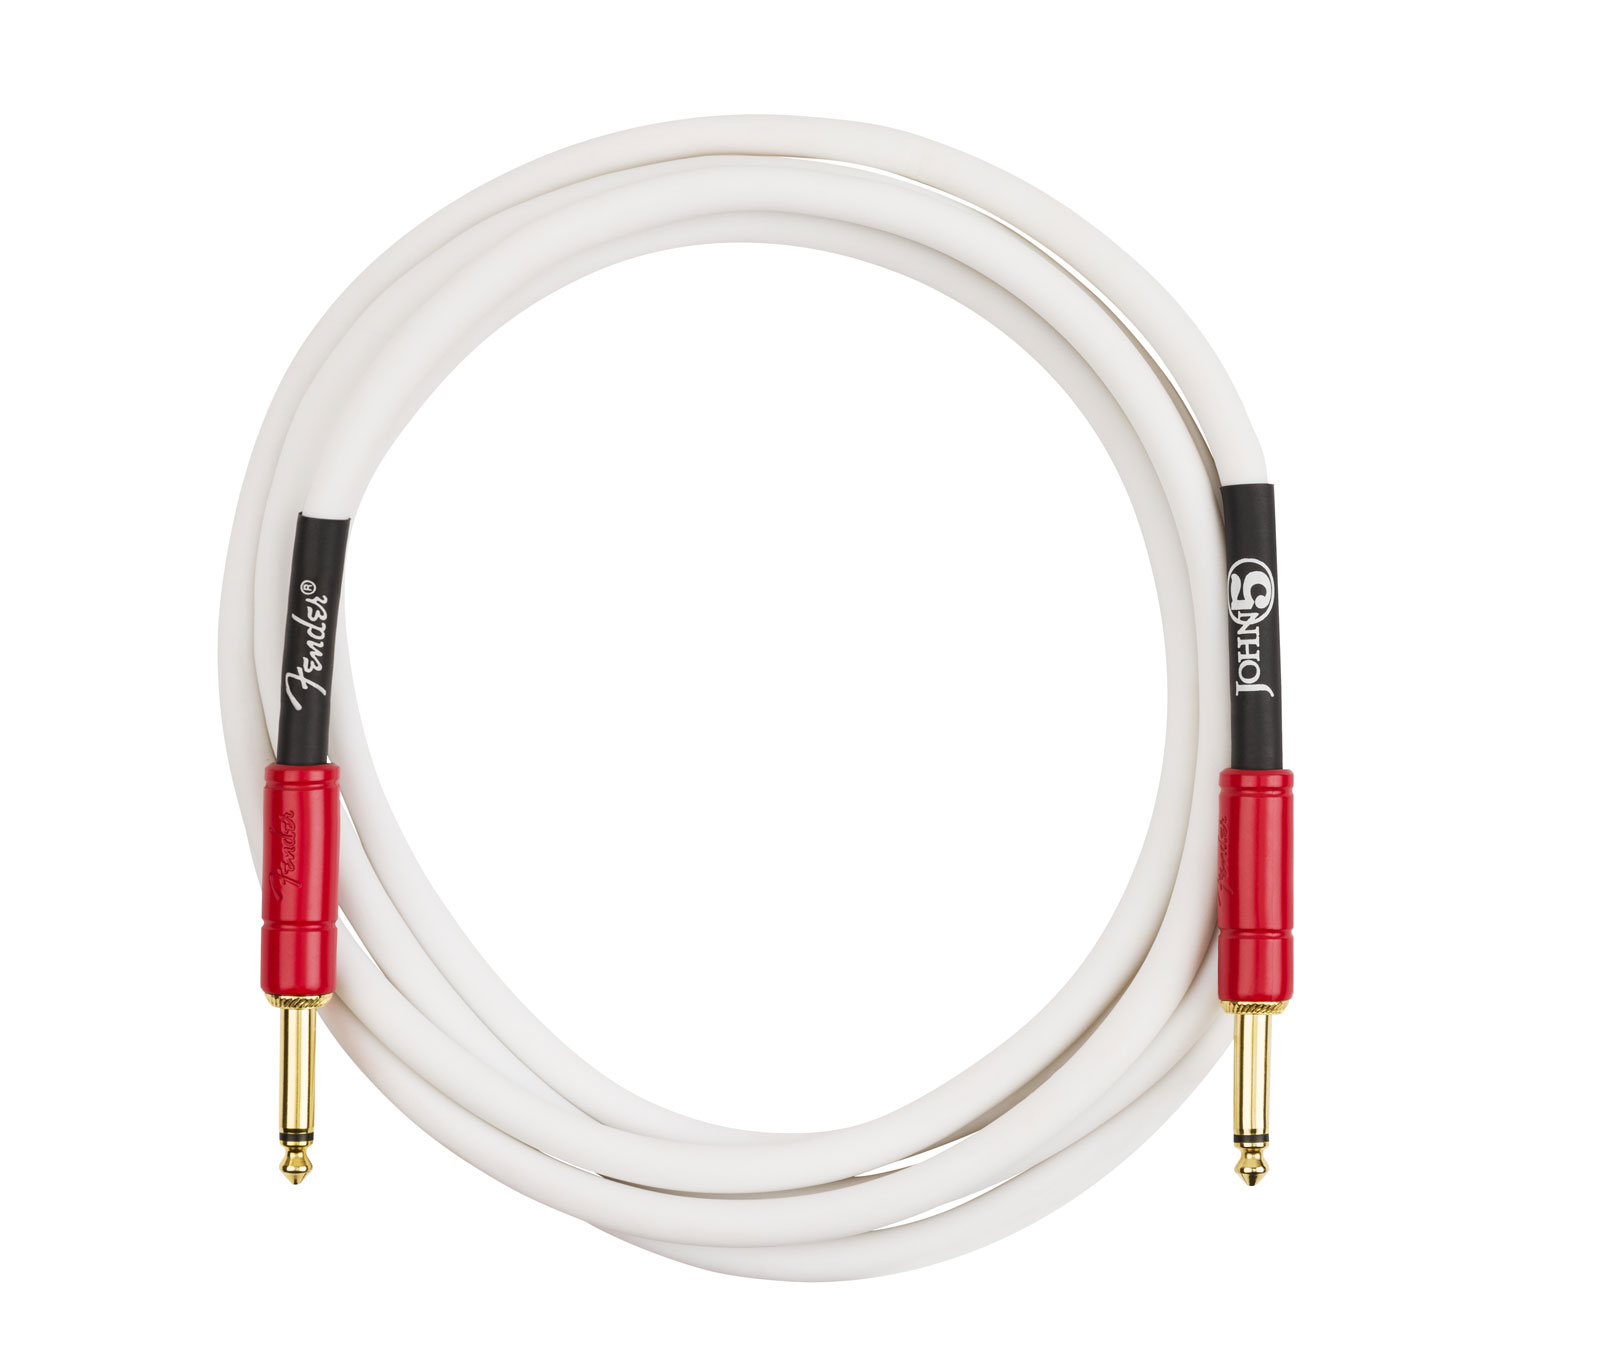 FENDER JOHN 5 INSTRUMENT CABLE WHITE AND RED 10'